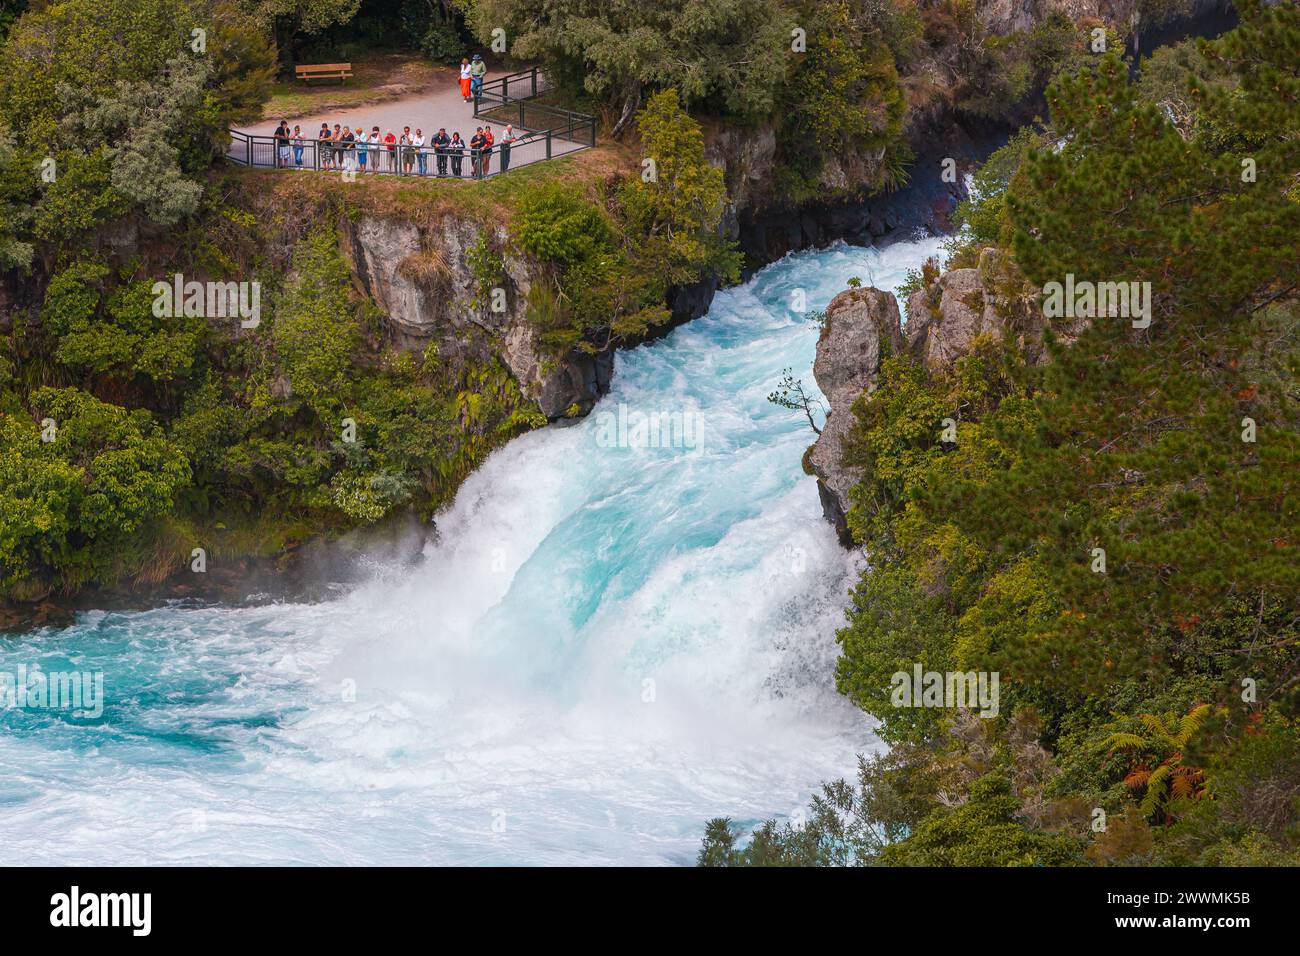 A group of people looking at the Huka Falls, a set of waterfalls on the Waikato River, which drains Lake Taupo, on the North Island in New Zealand. Stock Photo